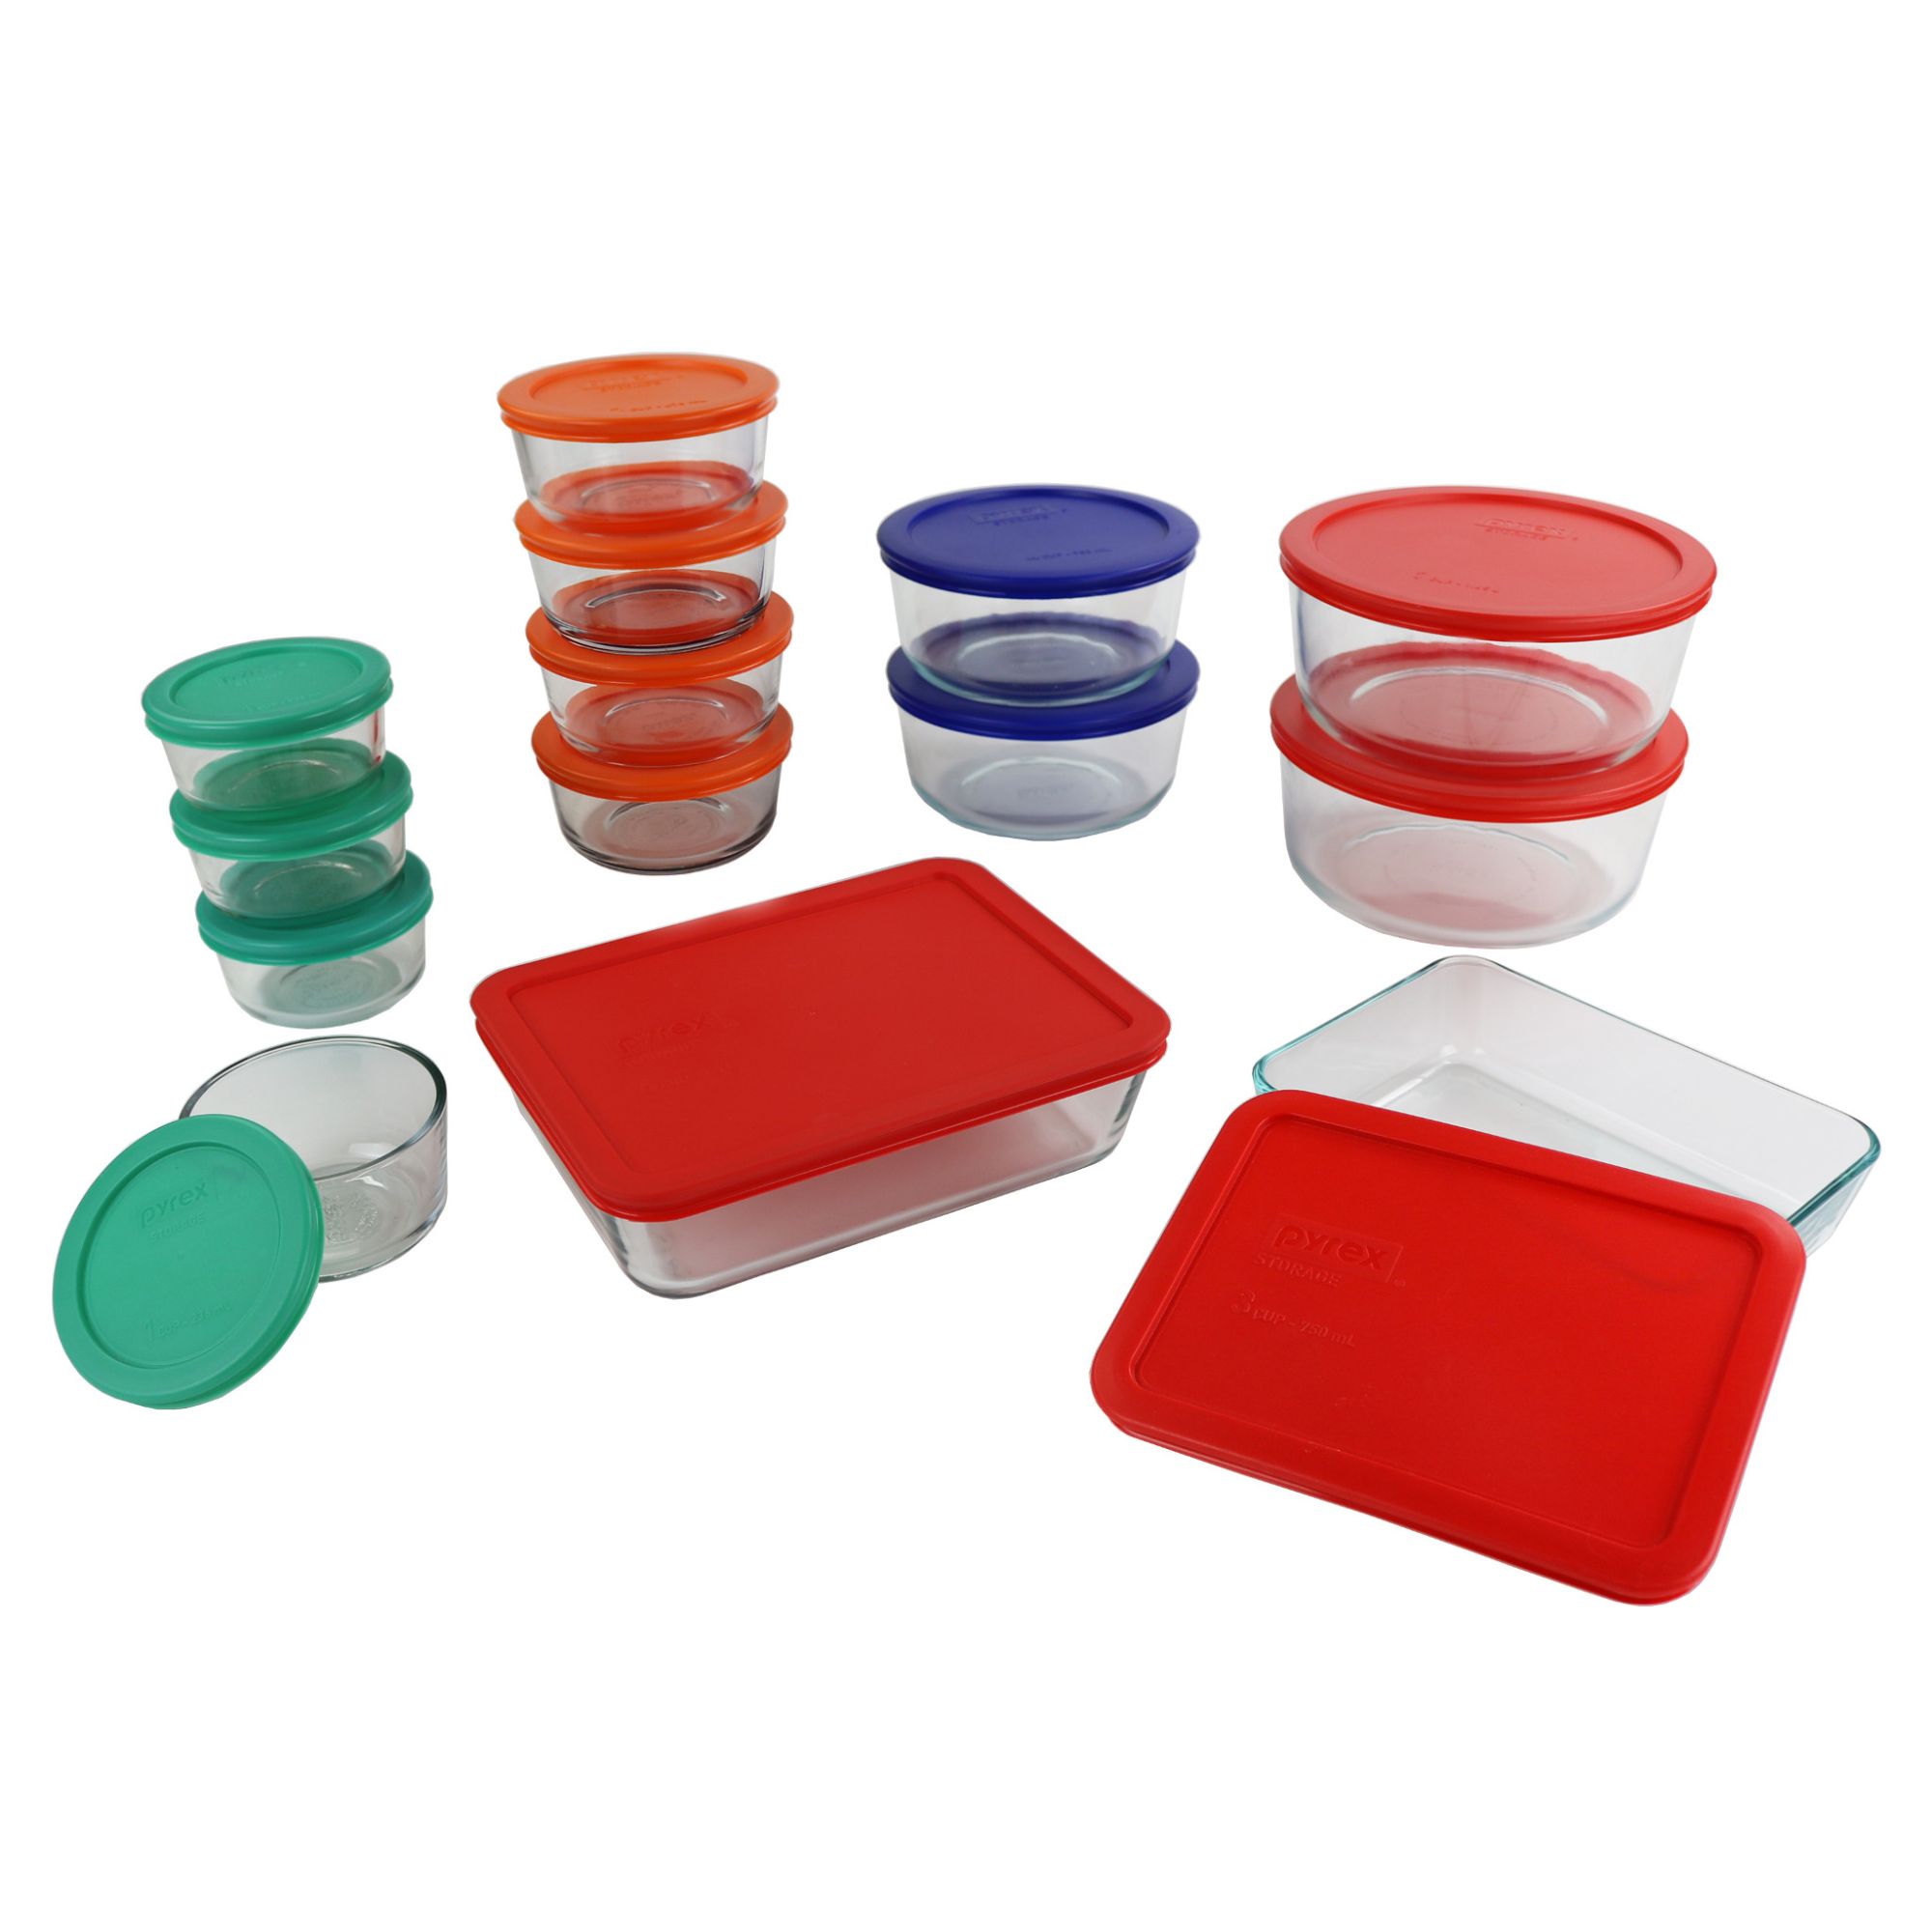 Pyrex Simply Food Storage & Bakeware Set with Colored Lids, 28 Piece - image 1 of 7